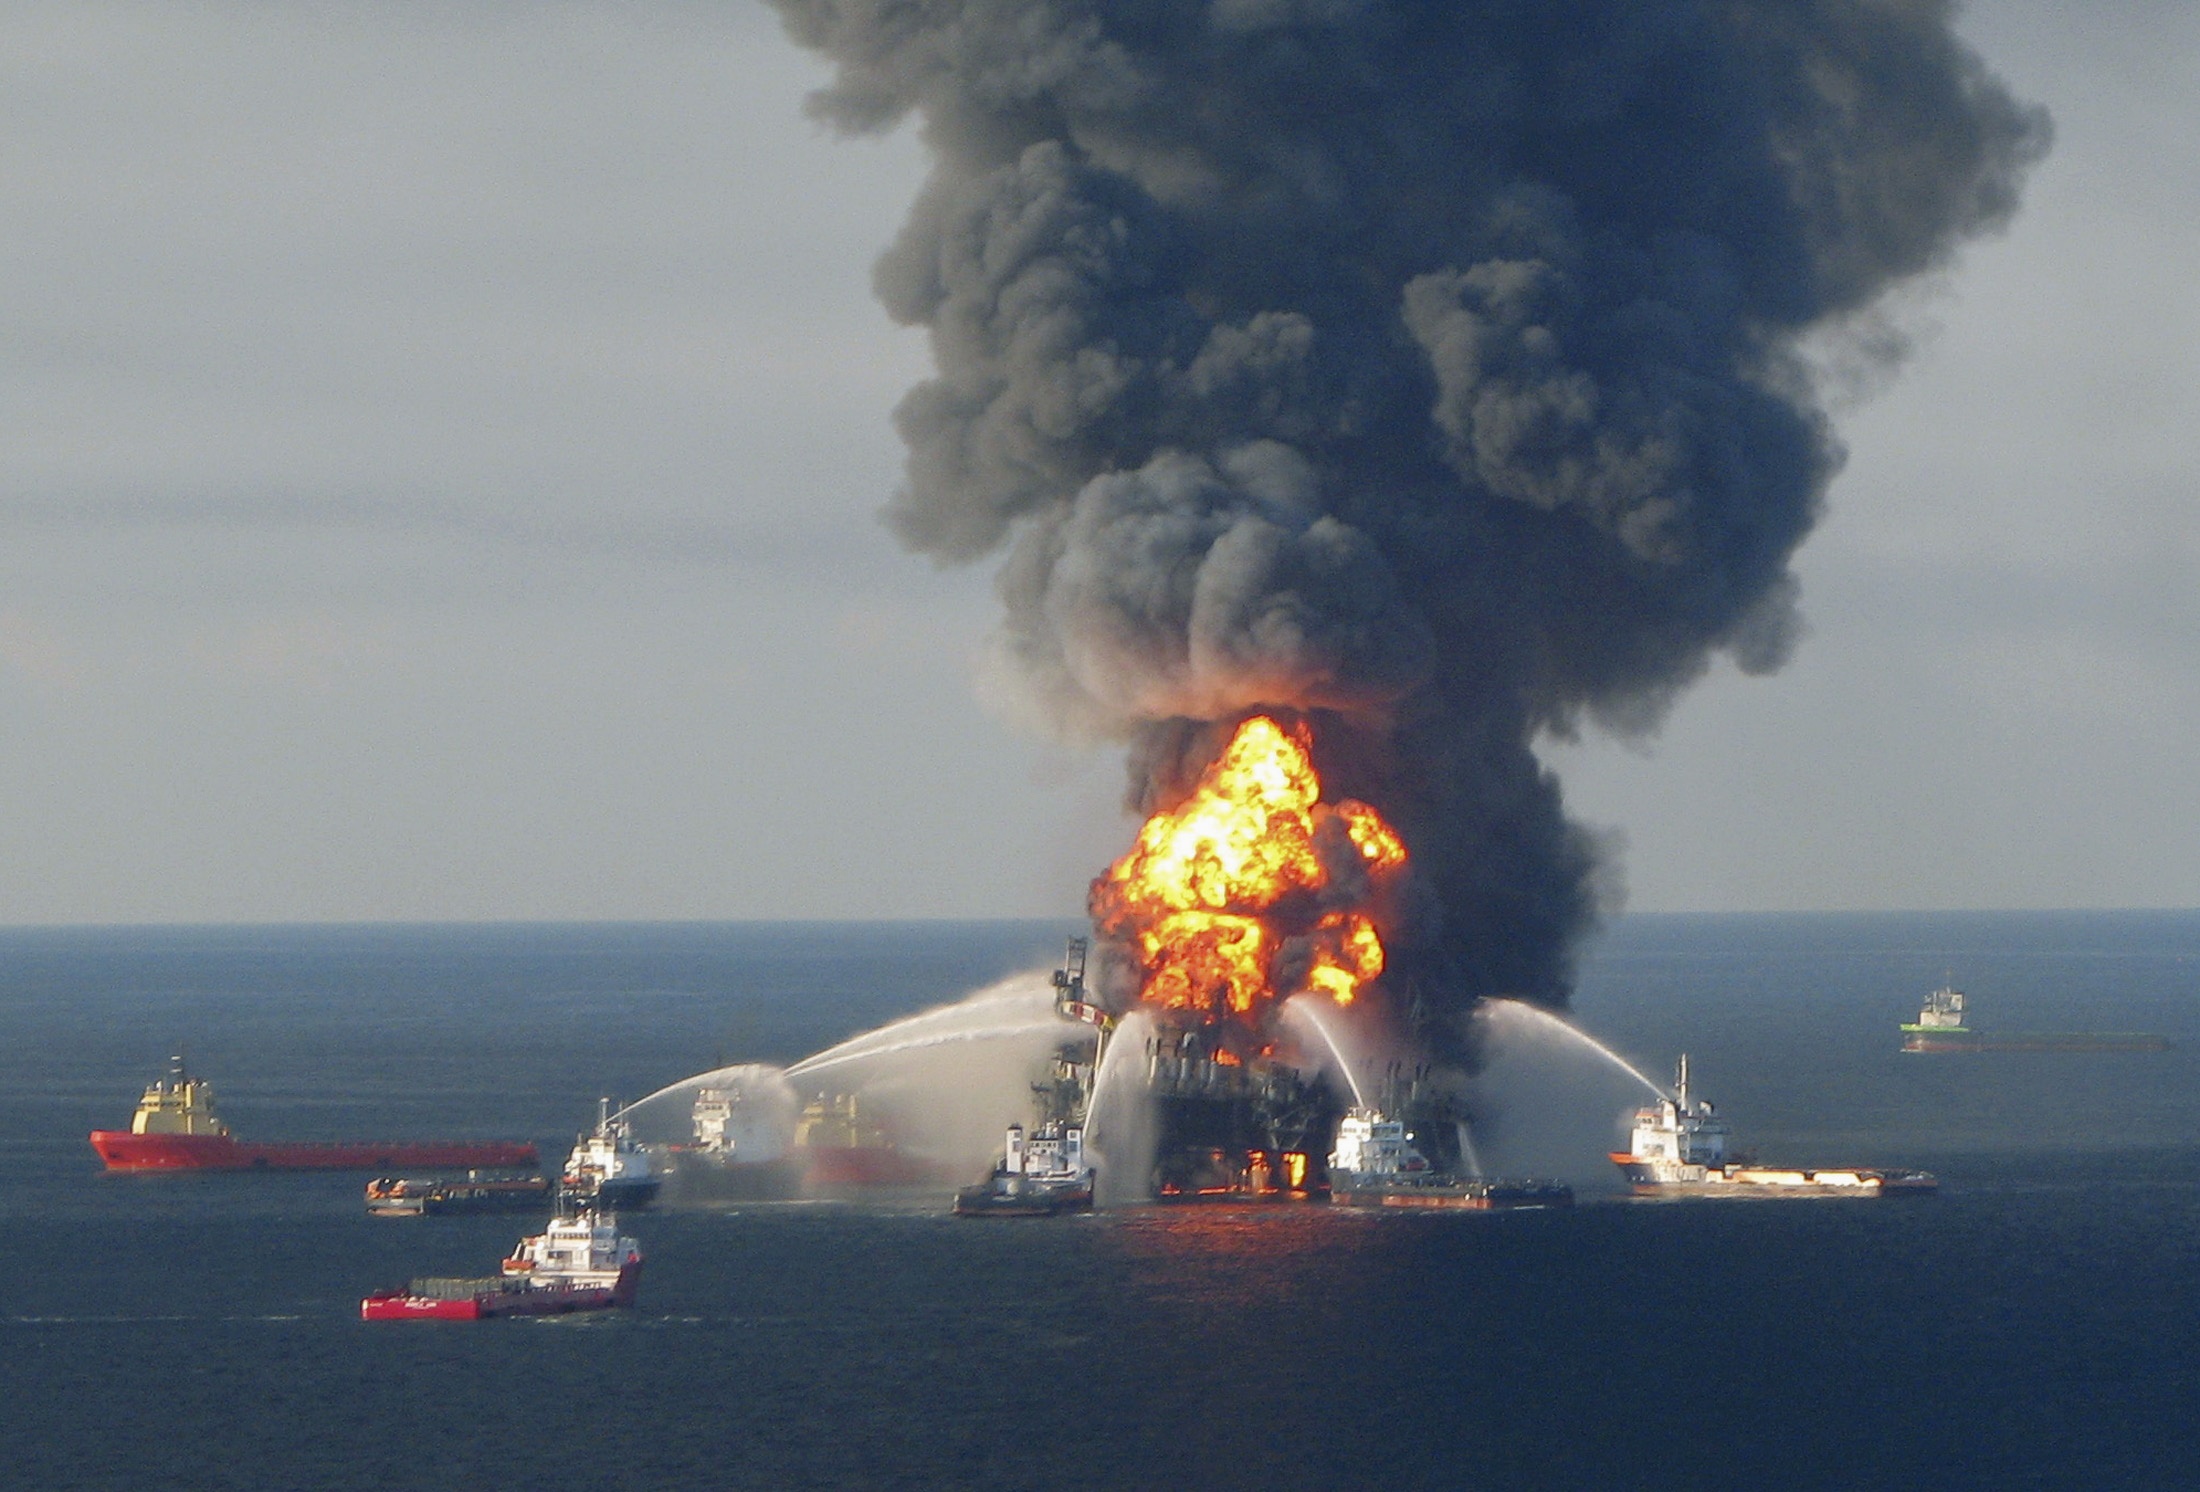 The 2010 Deepwater Horizon oil spill which followed the explosion and sinking of the Deepwater Horizon oil rig, which claimed 11 lives, is the largest accidental marine oil spill in US history. Photo: Reuters